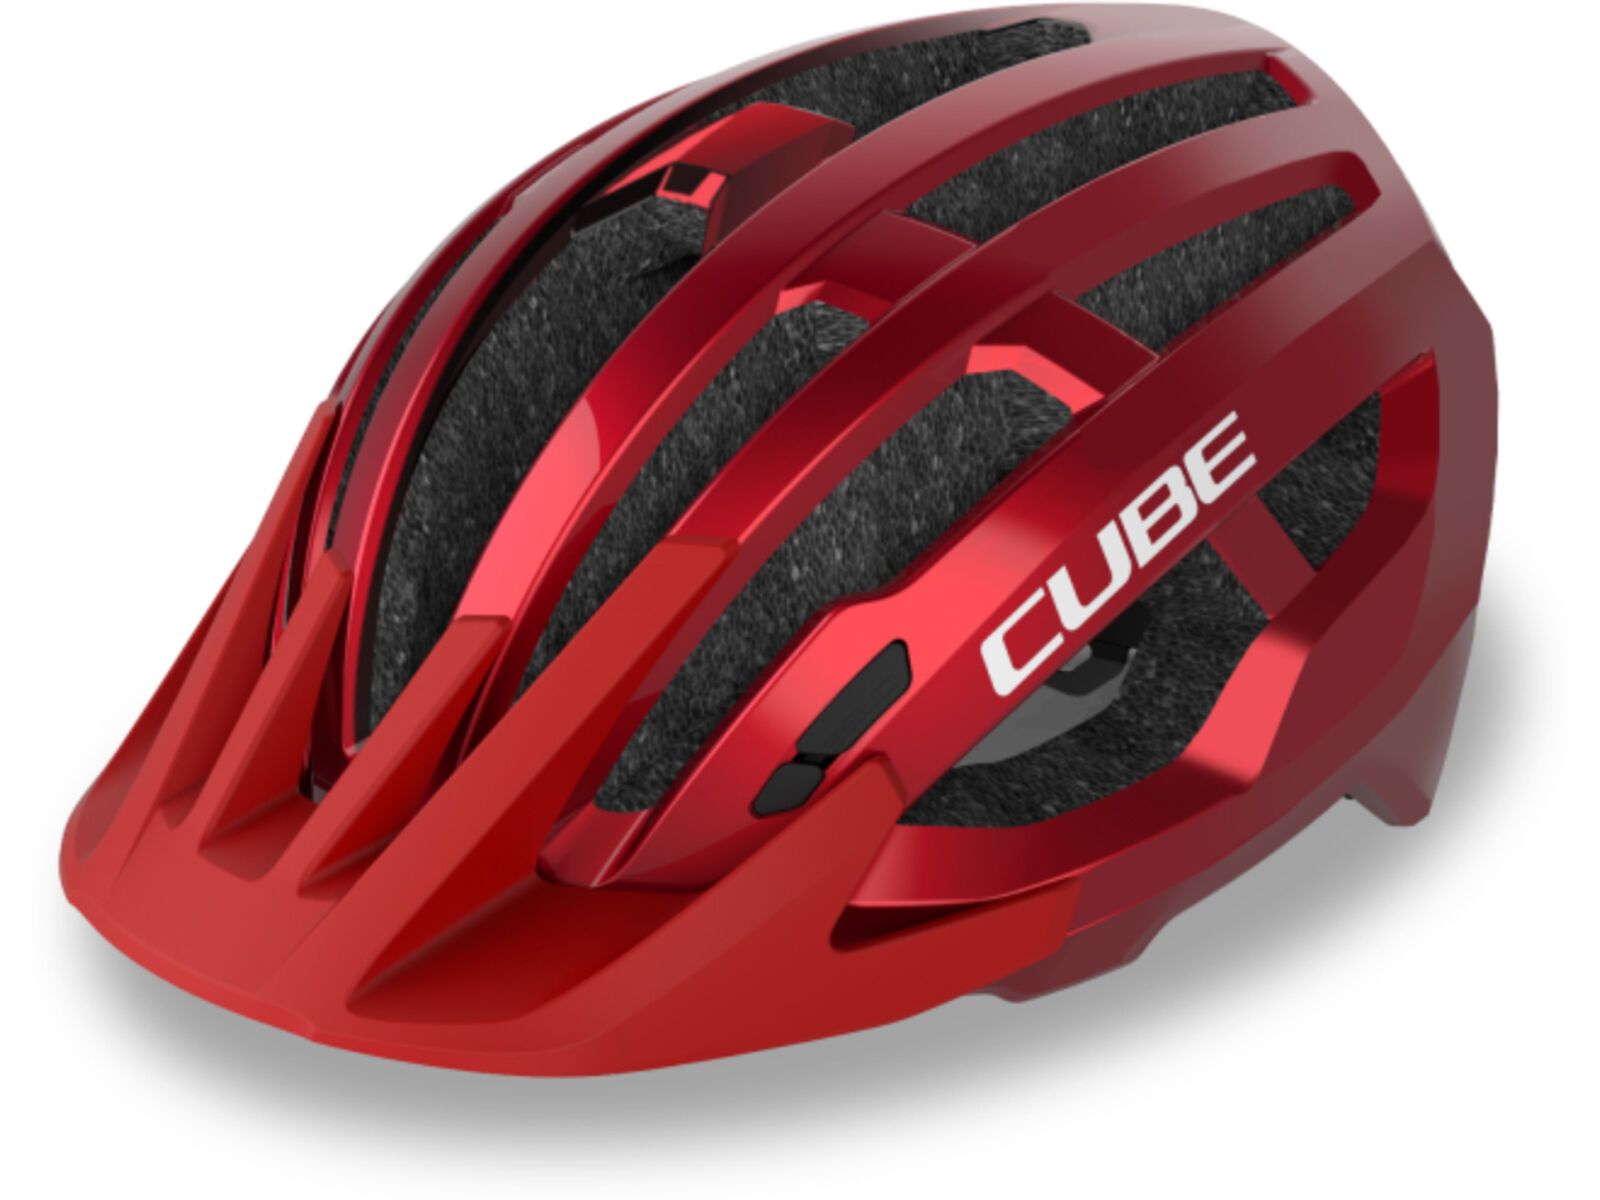 Cube Helm Offpath, red | Bild 1